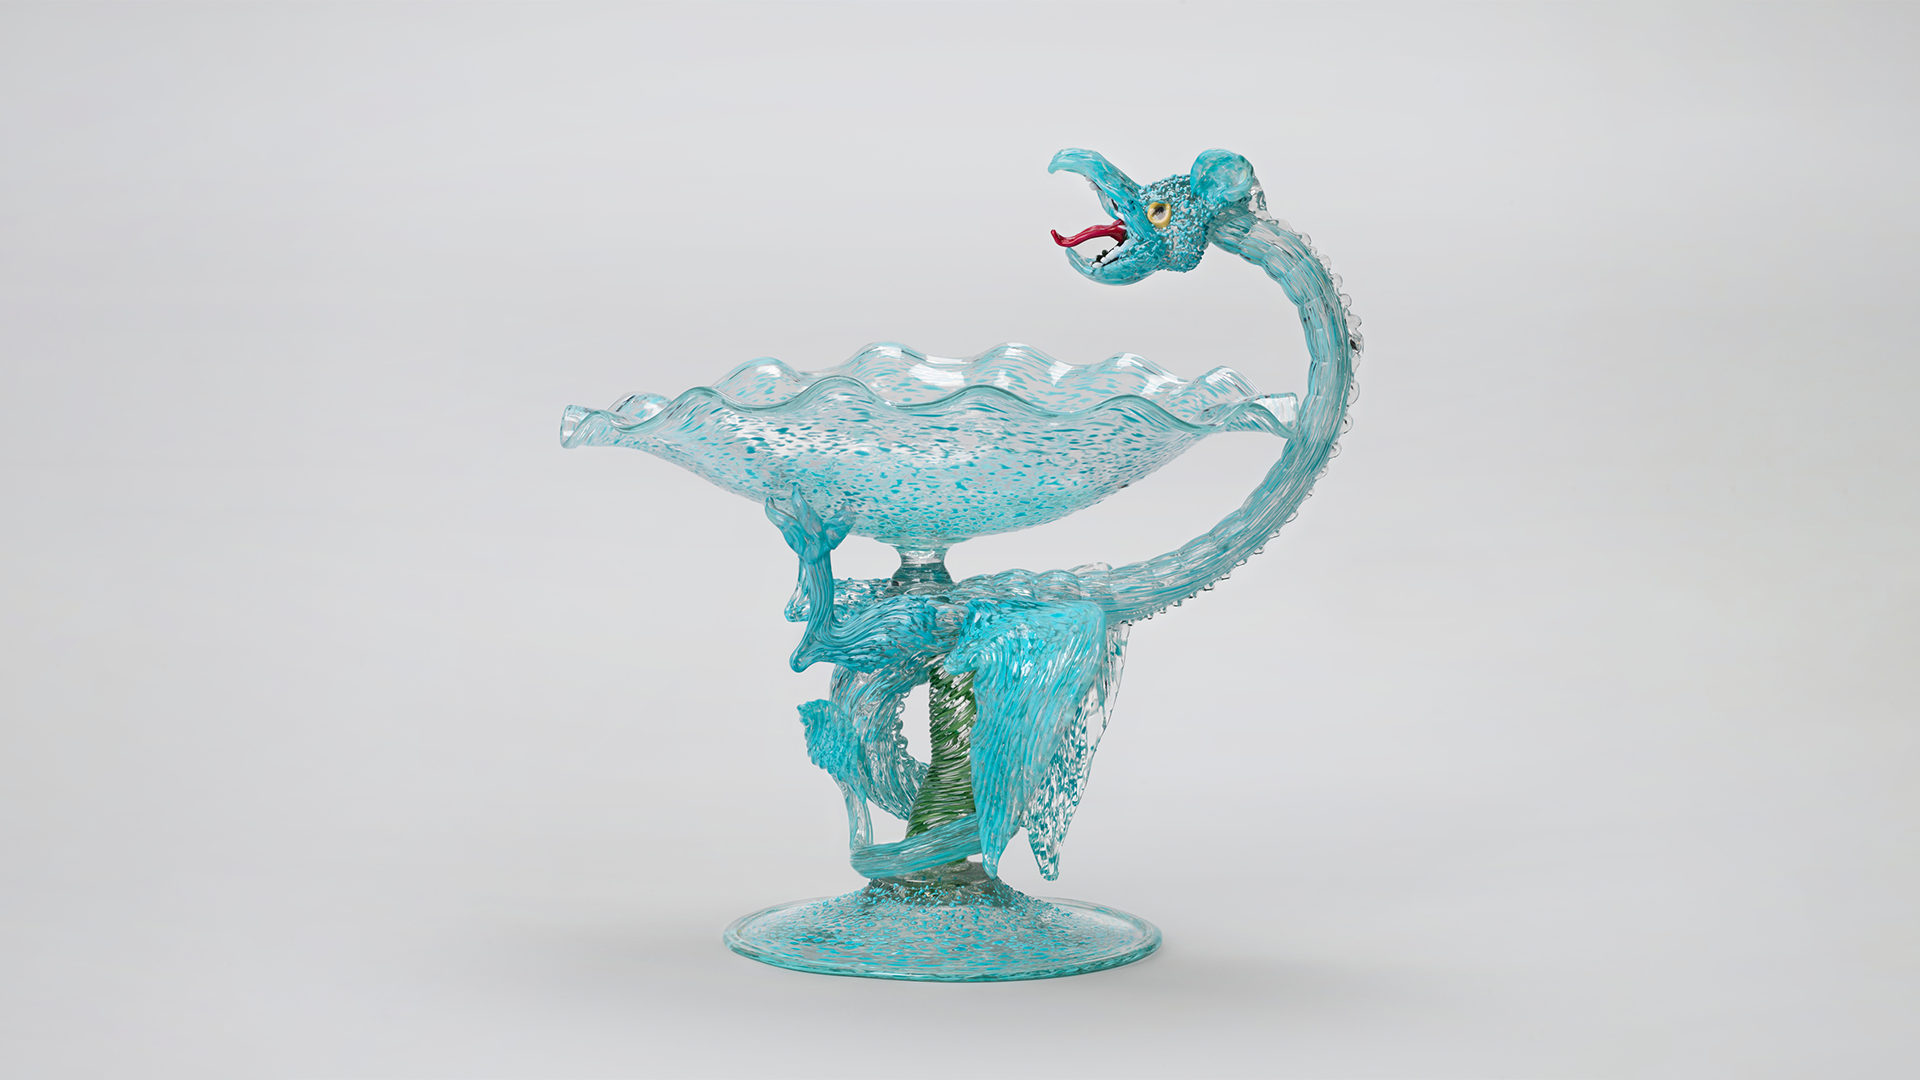 A dragon twists around the stem of a glass goblet forming the handle.